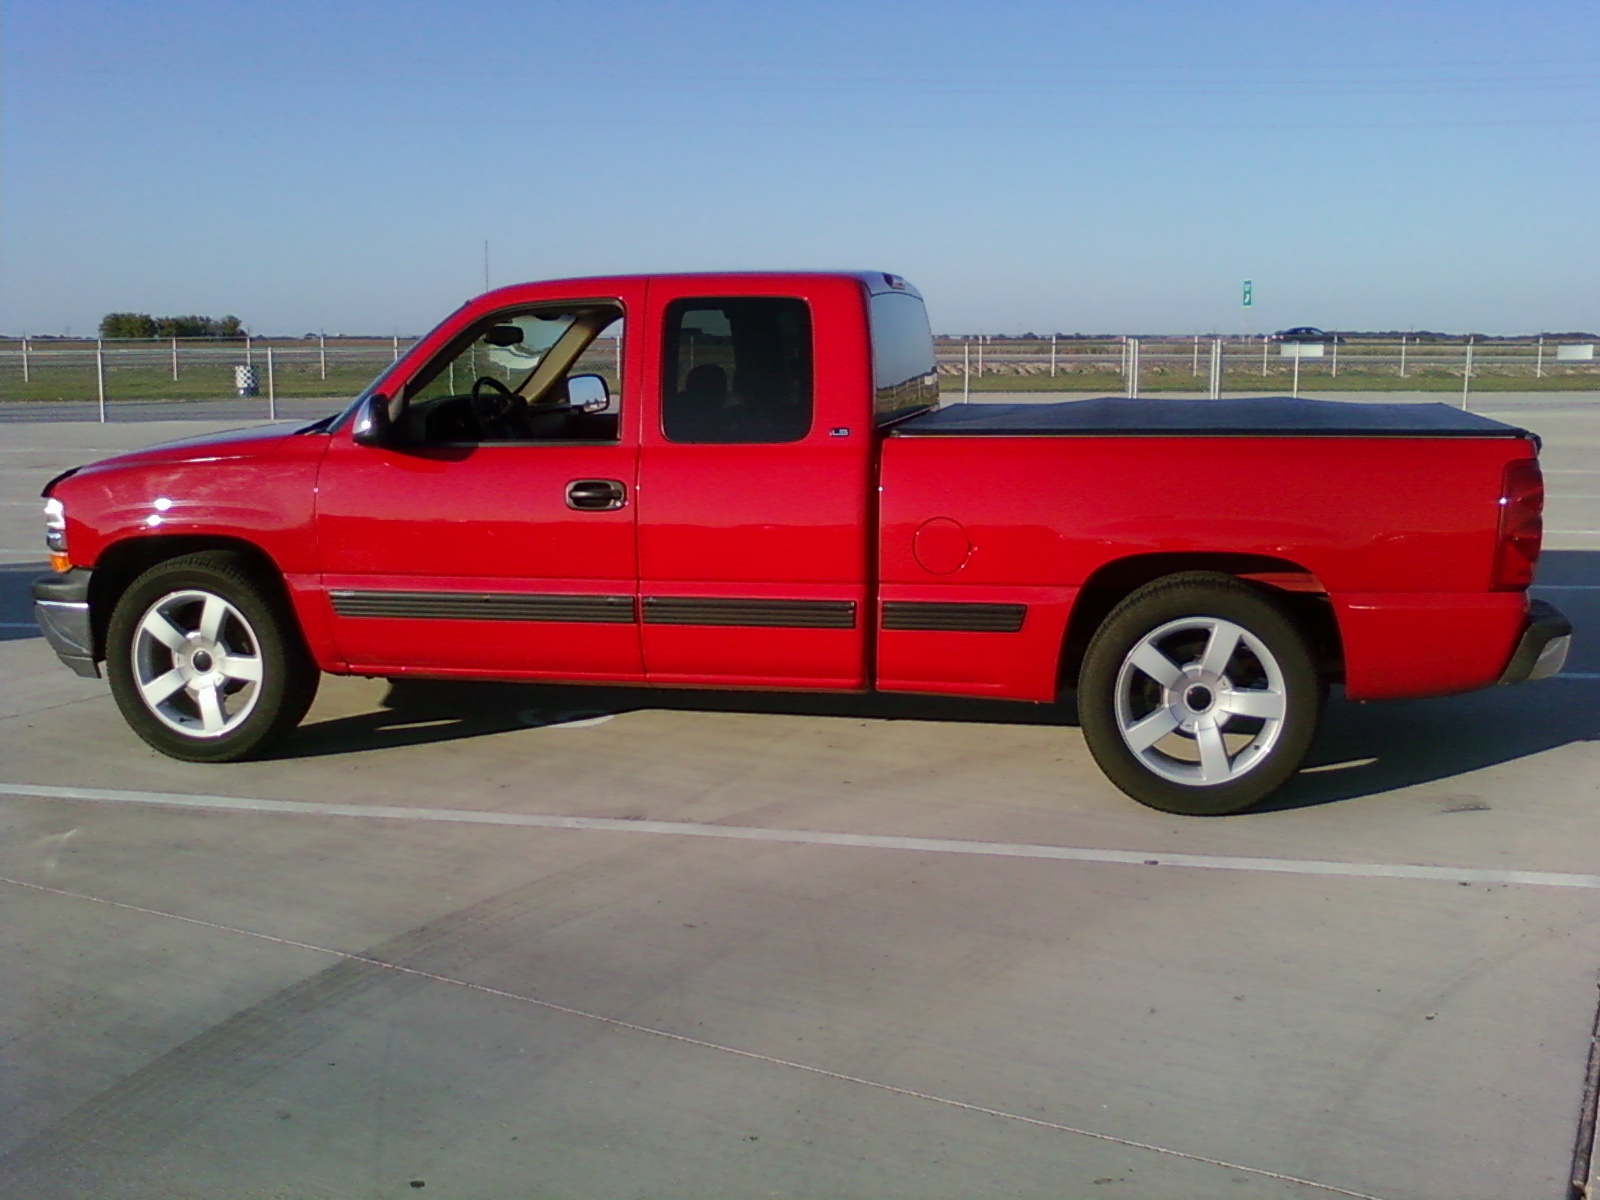 2001 Hot Rod Red Chevrolet CK1500 Truck LS, Daily Driver picture, mods, upgrades